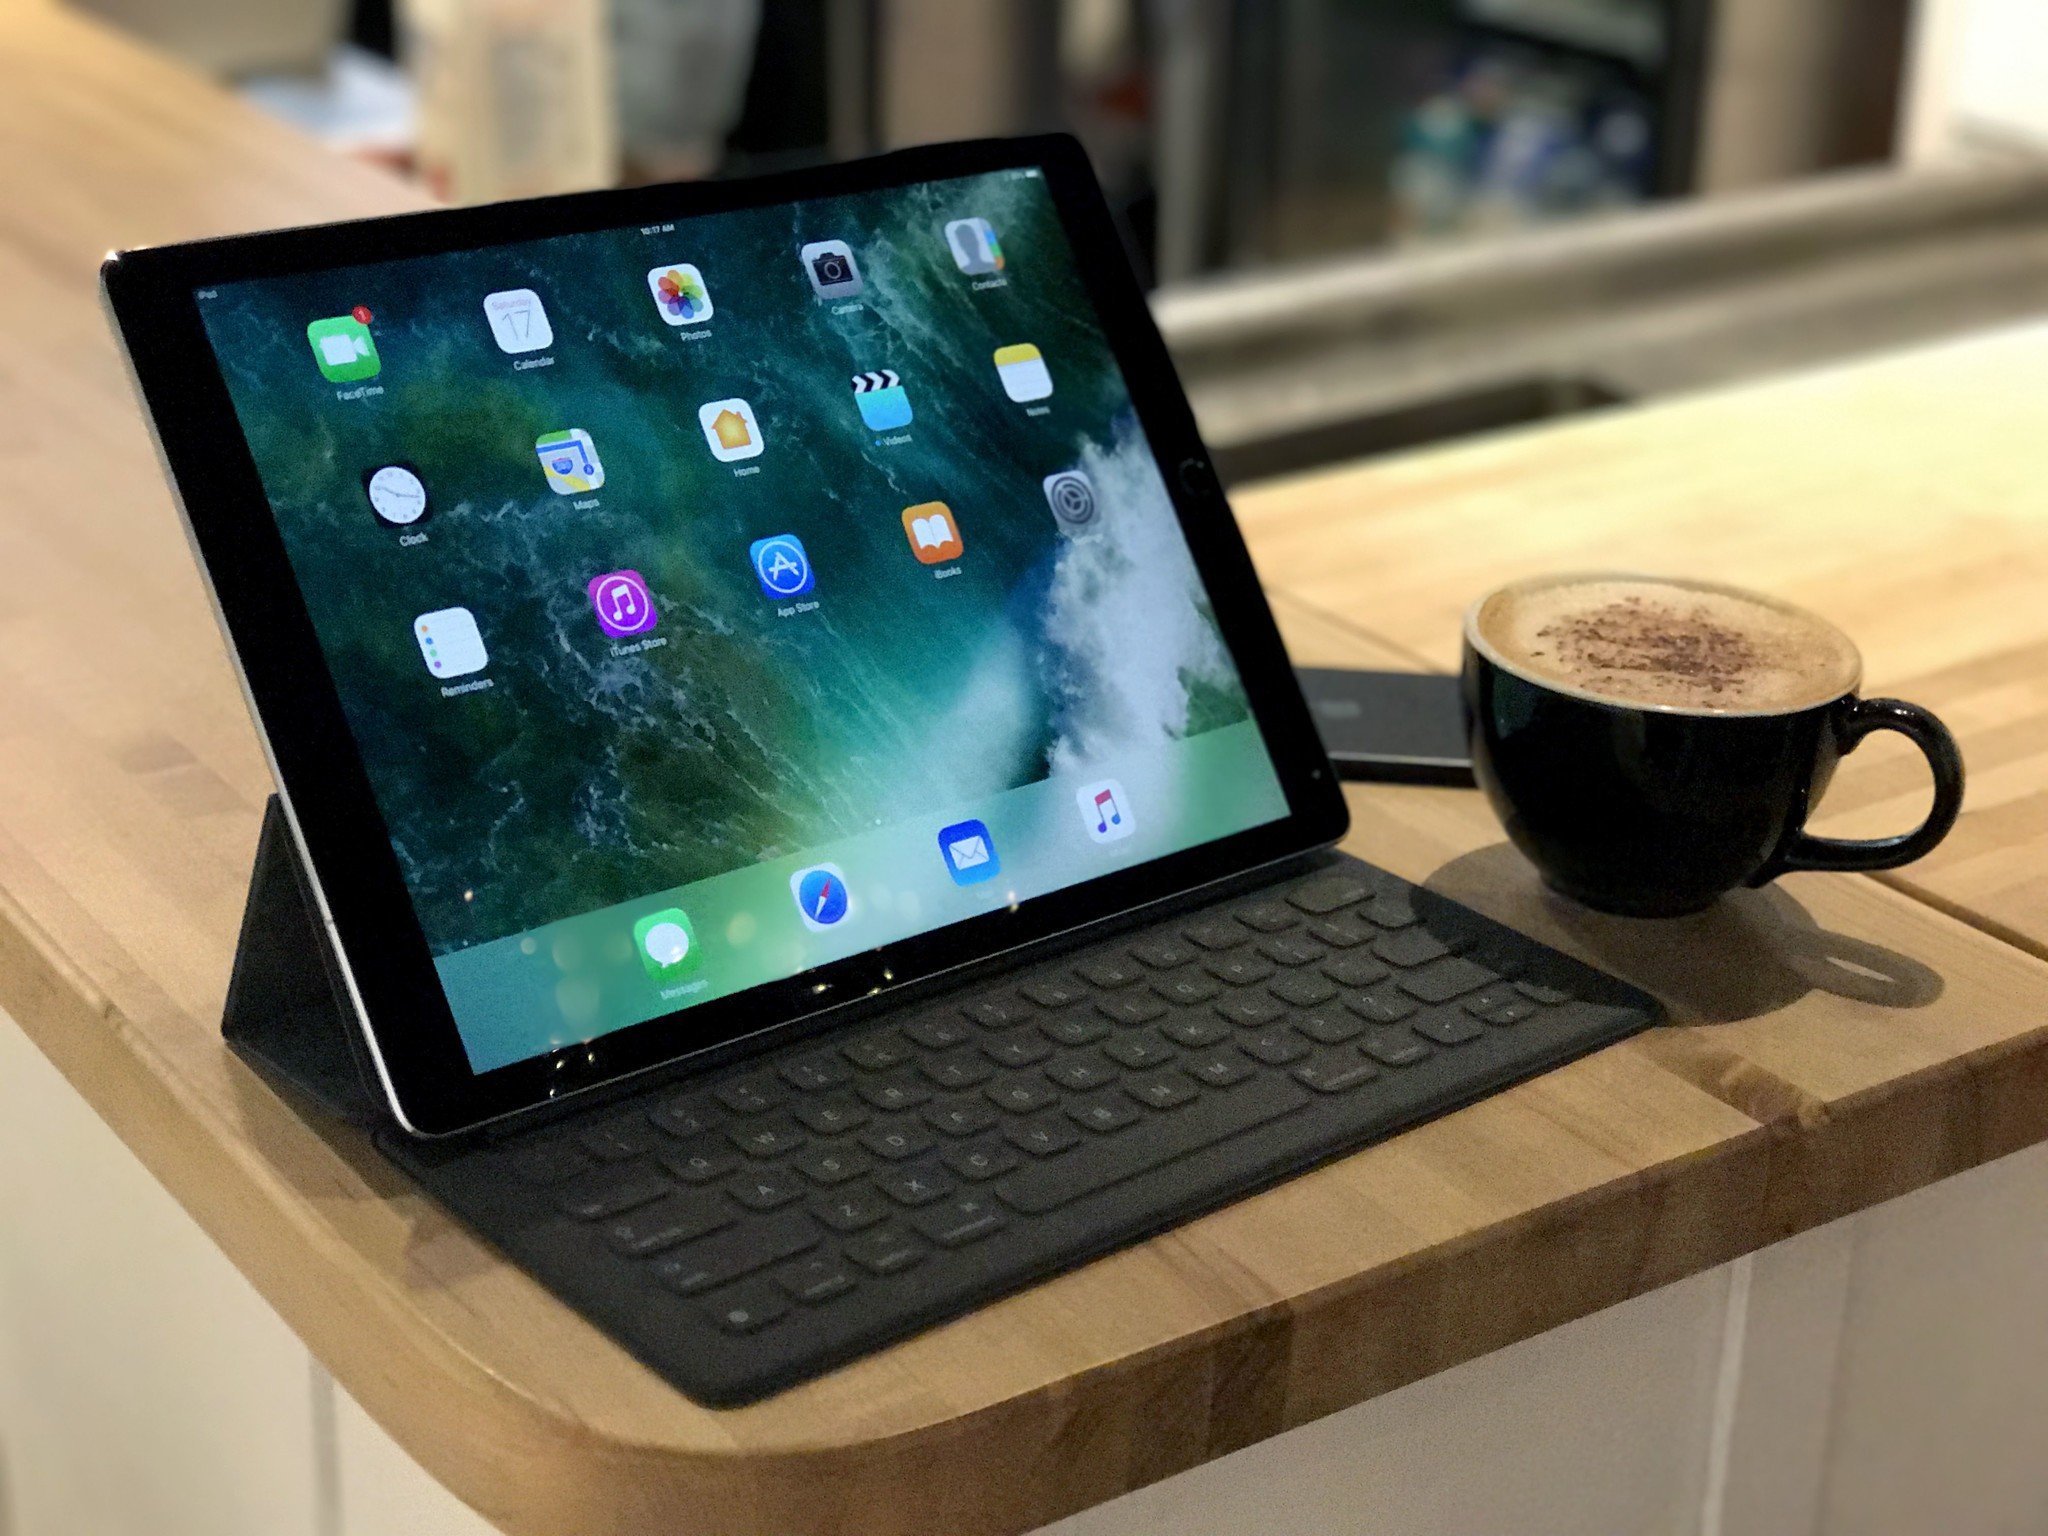 Apple iPad Pro (12.9-Inch, 2017) Review